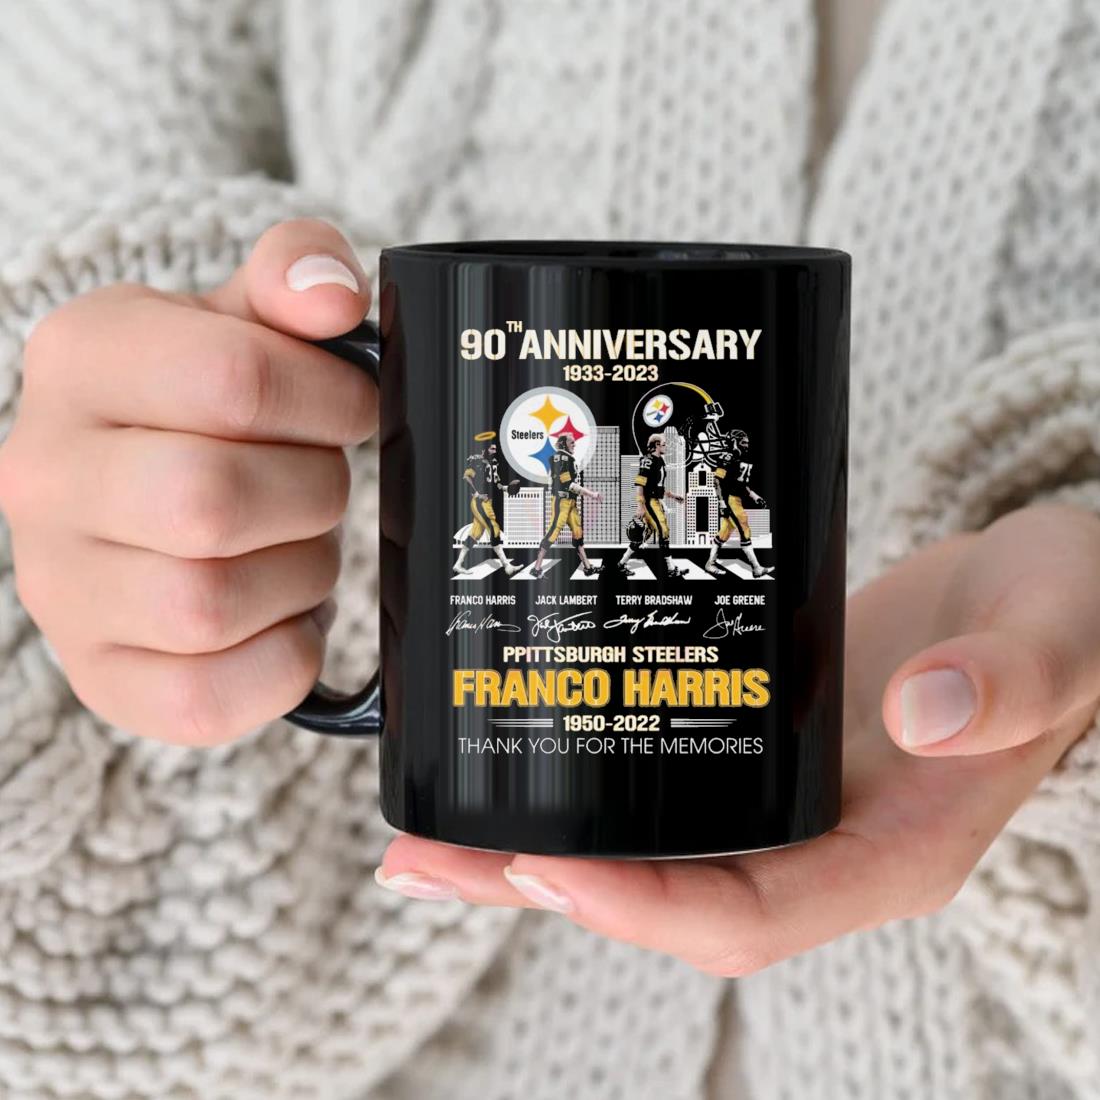 90th Anniversary 1933-2023 Pittsburgh Steelers Franco Harris 1950-2022 Thank You For The Memories Signatures Mug